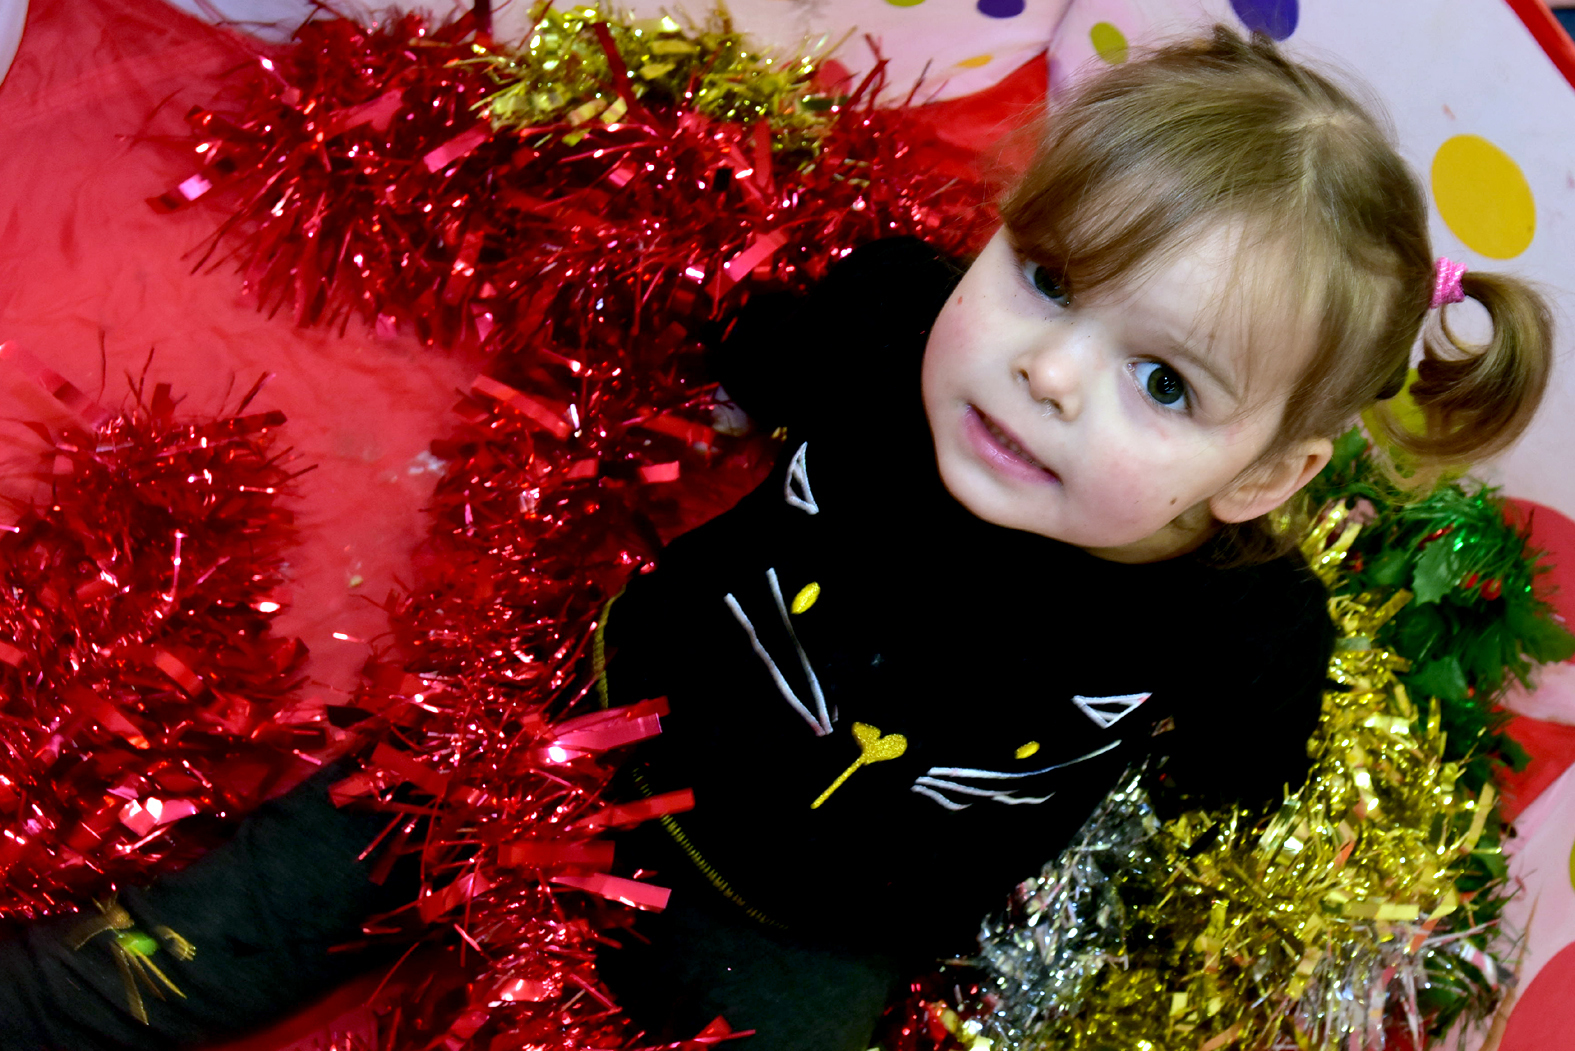 Messy festive fun comes to Queen's Park